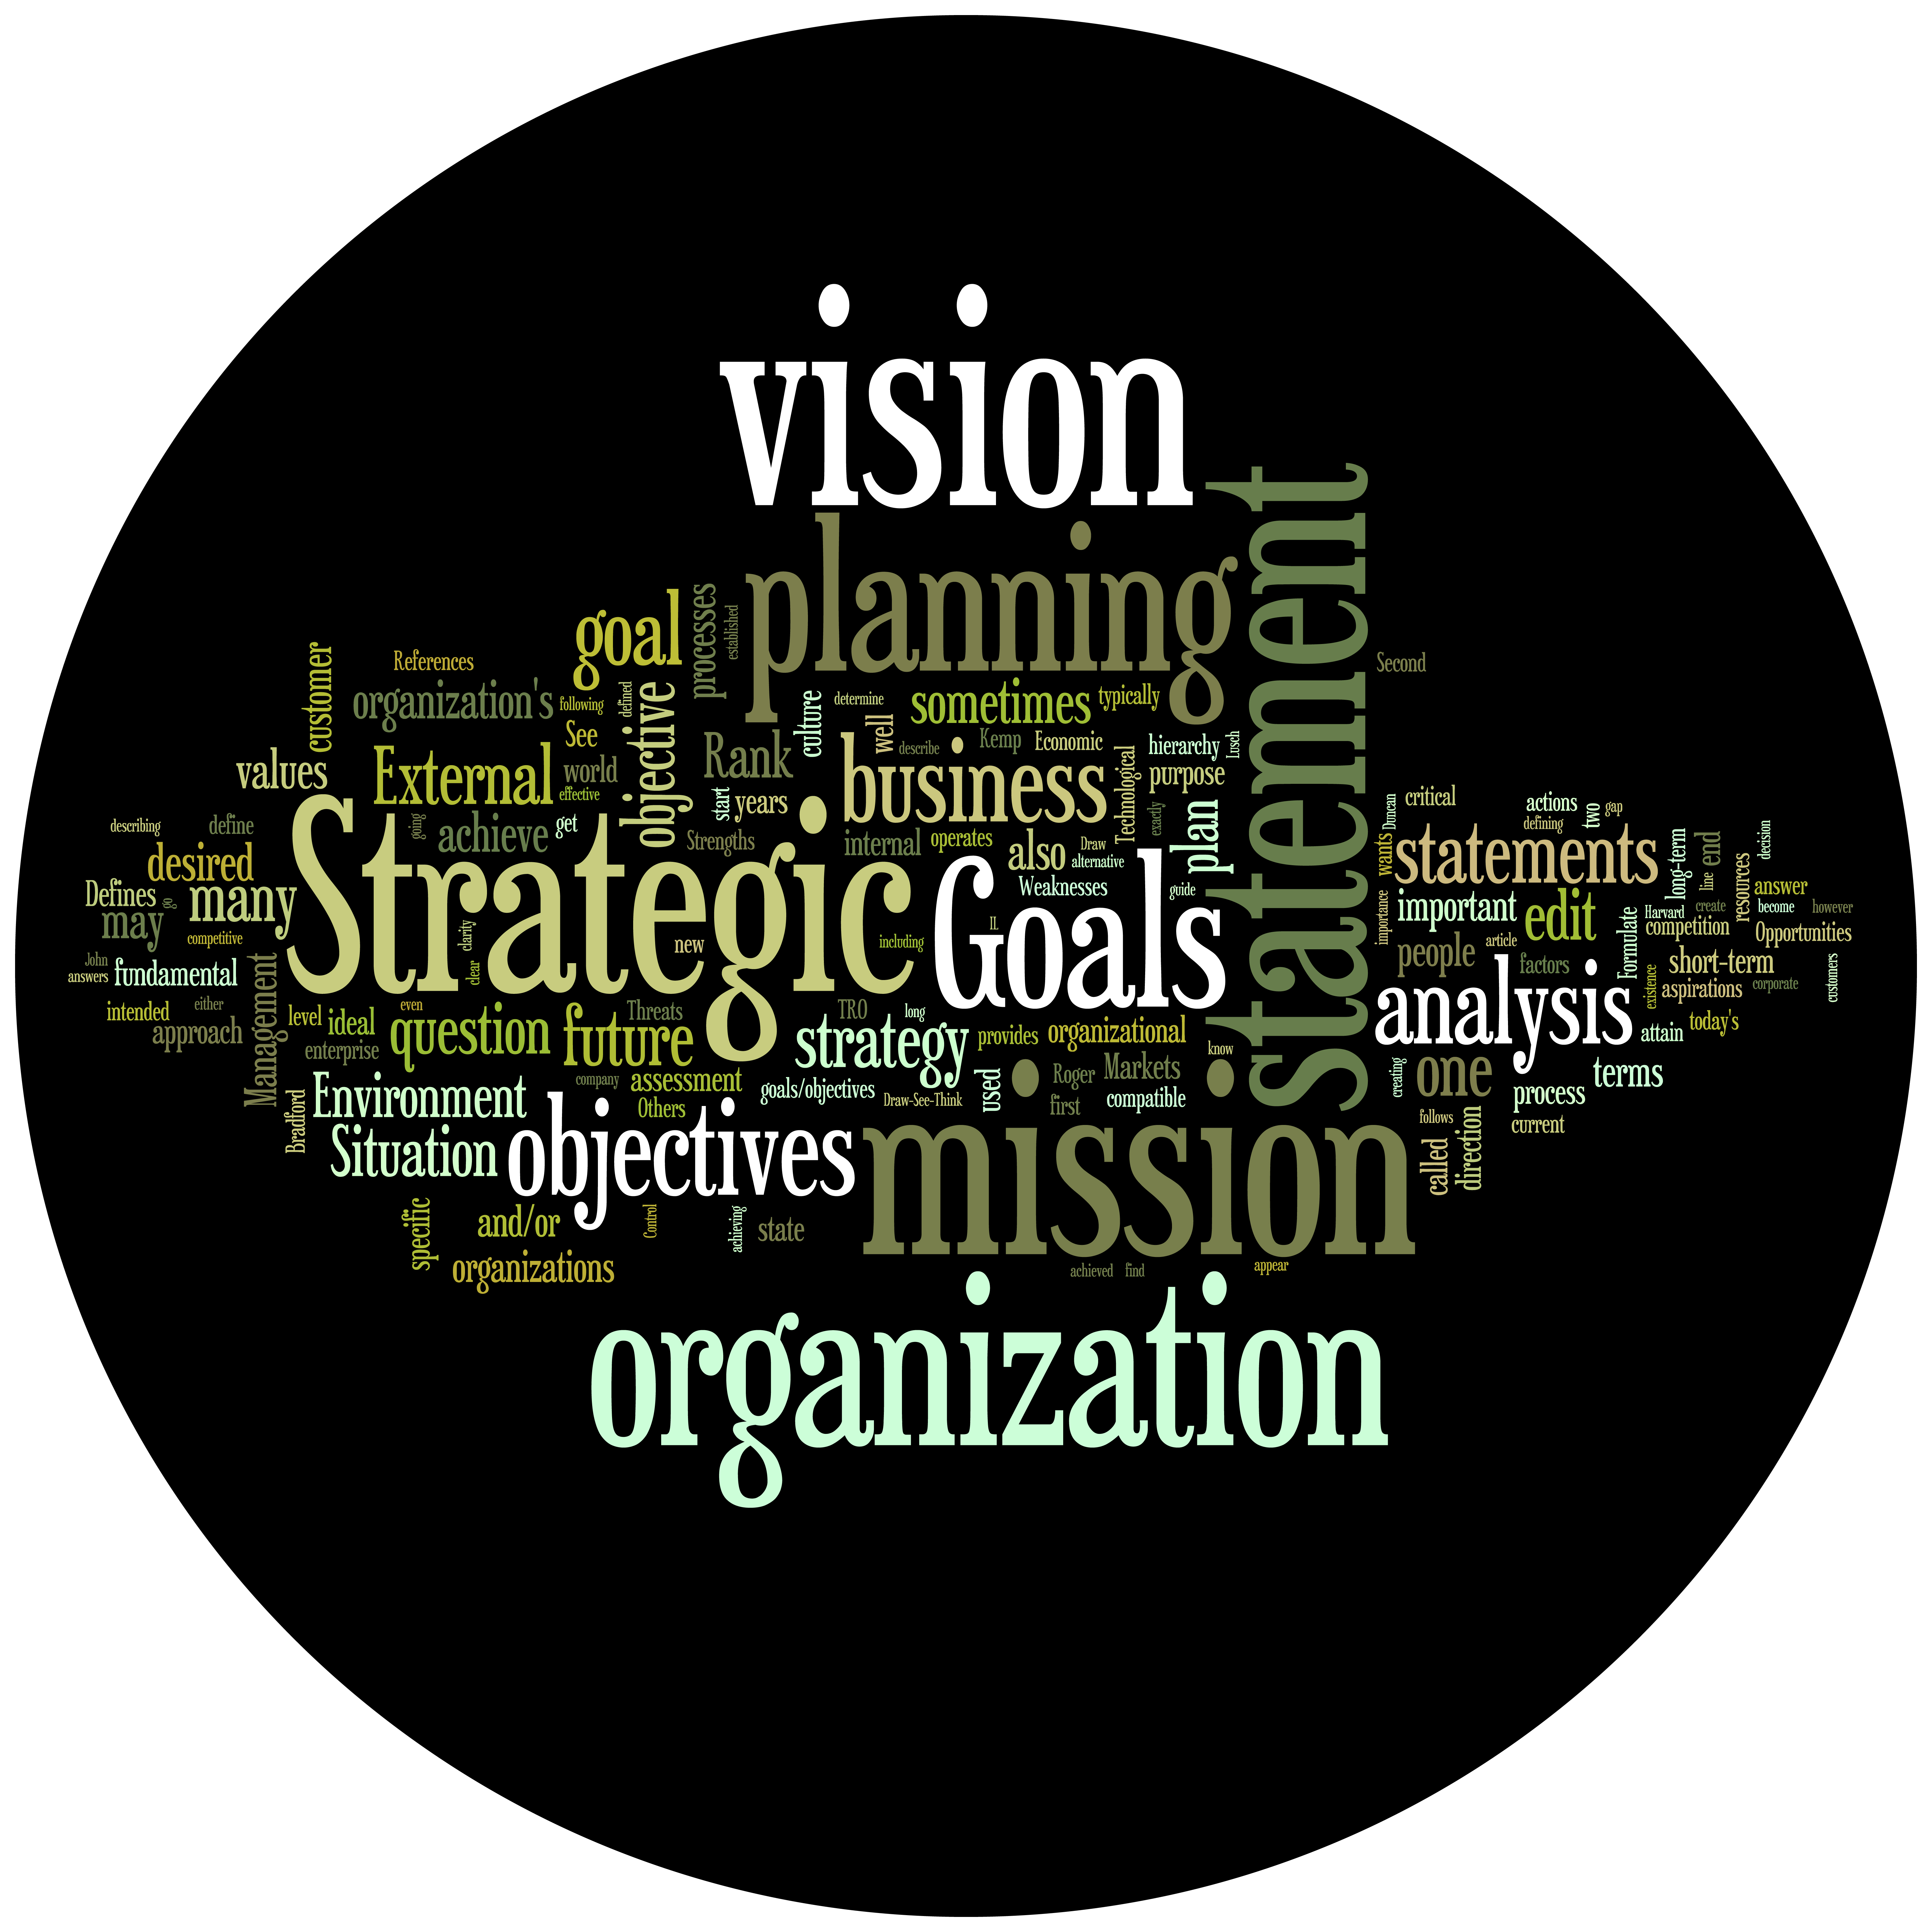 "Strategic Planning" by Stefano Senise from Thinkstock is licensed under CC BY 2.0.